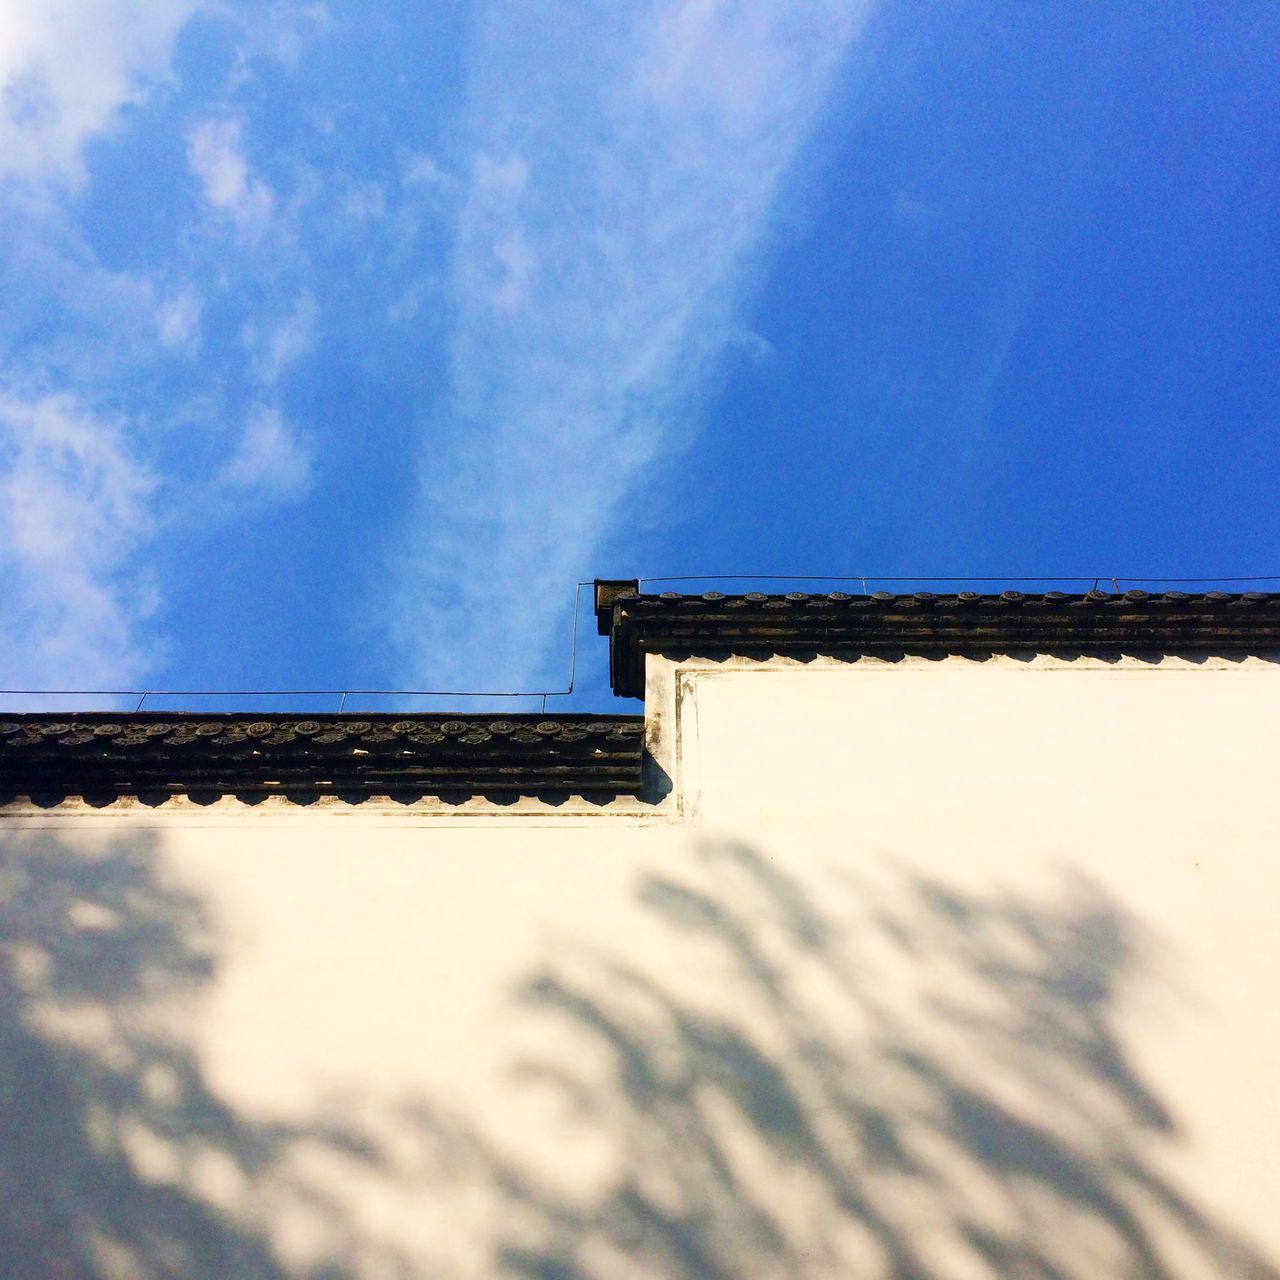 architecture, built structure, low angle view, sky, building exterior, blue, cloud - sky, cloud, day, high section, outdoors, sunlight, no people, roof, building, wall - building feature, nature, house, wall, cloudy